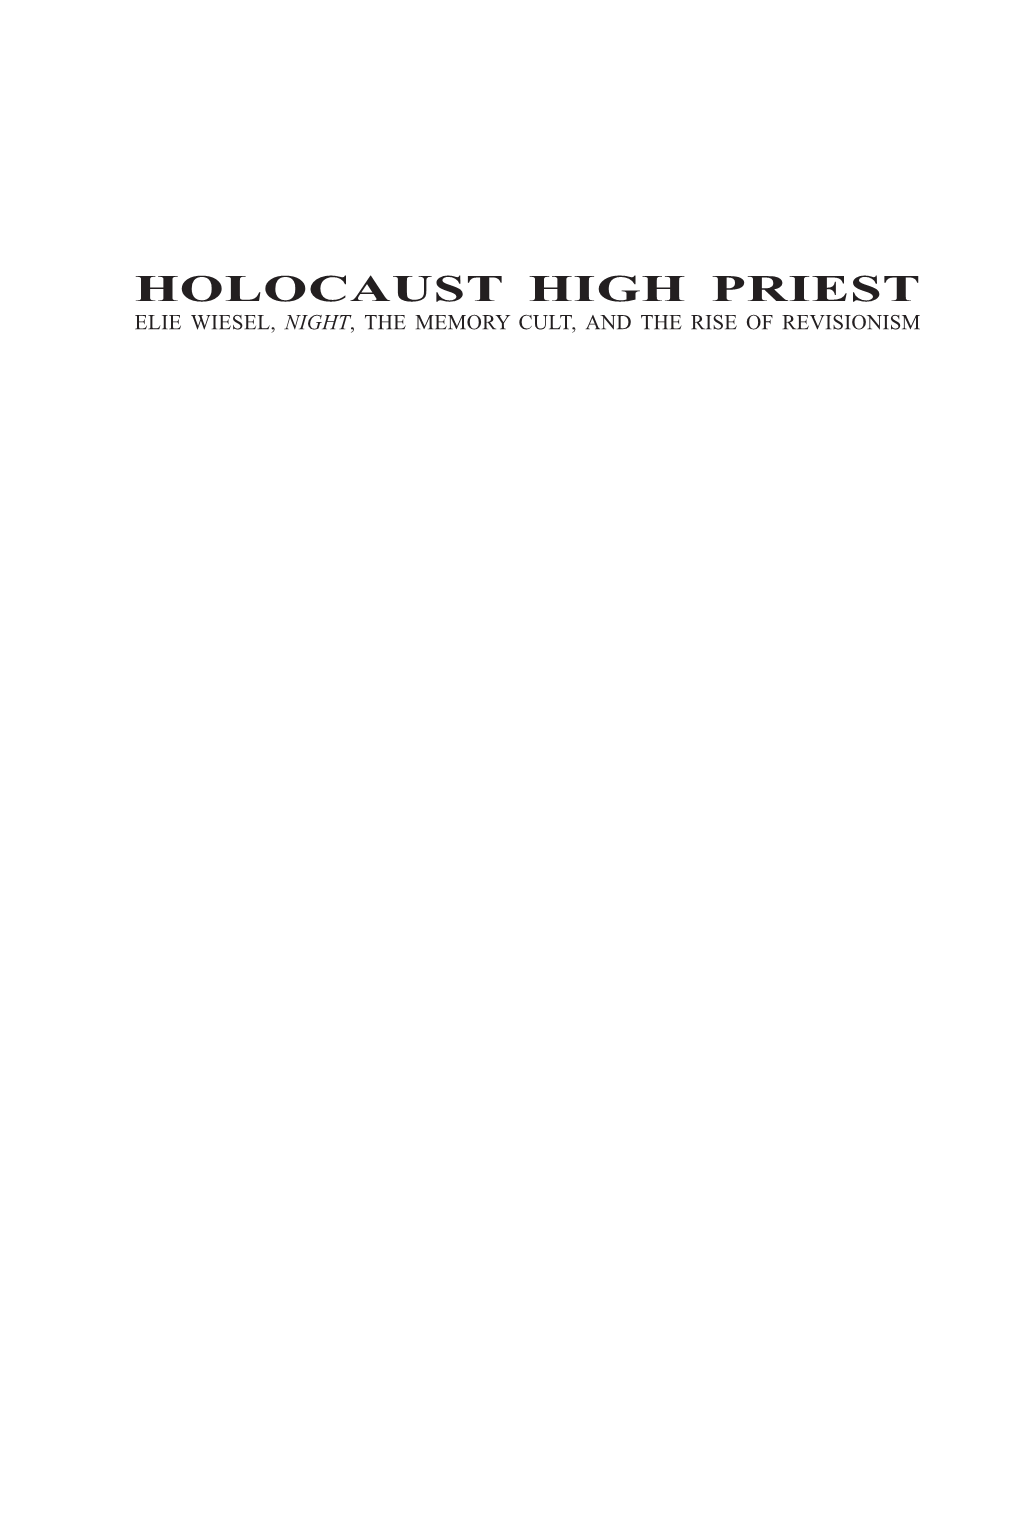 Holocaust High Priest Elie Wiesel, Night, the Memory Cult, and the Rise of Revisionism